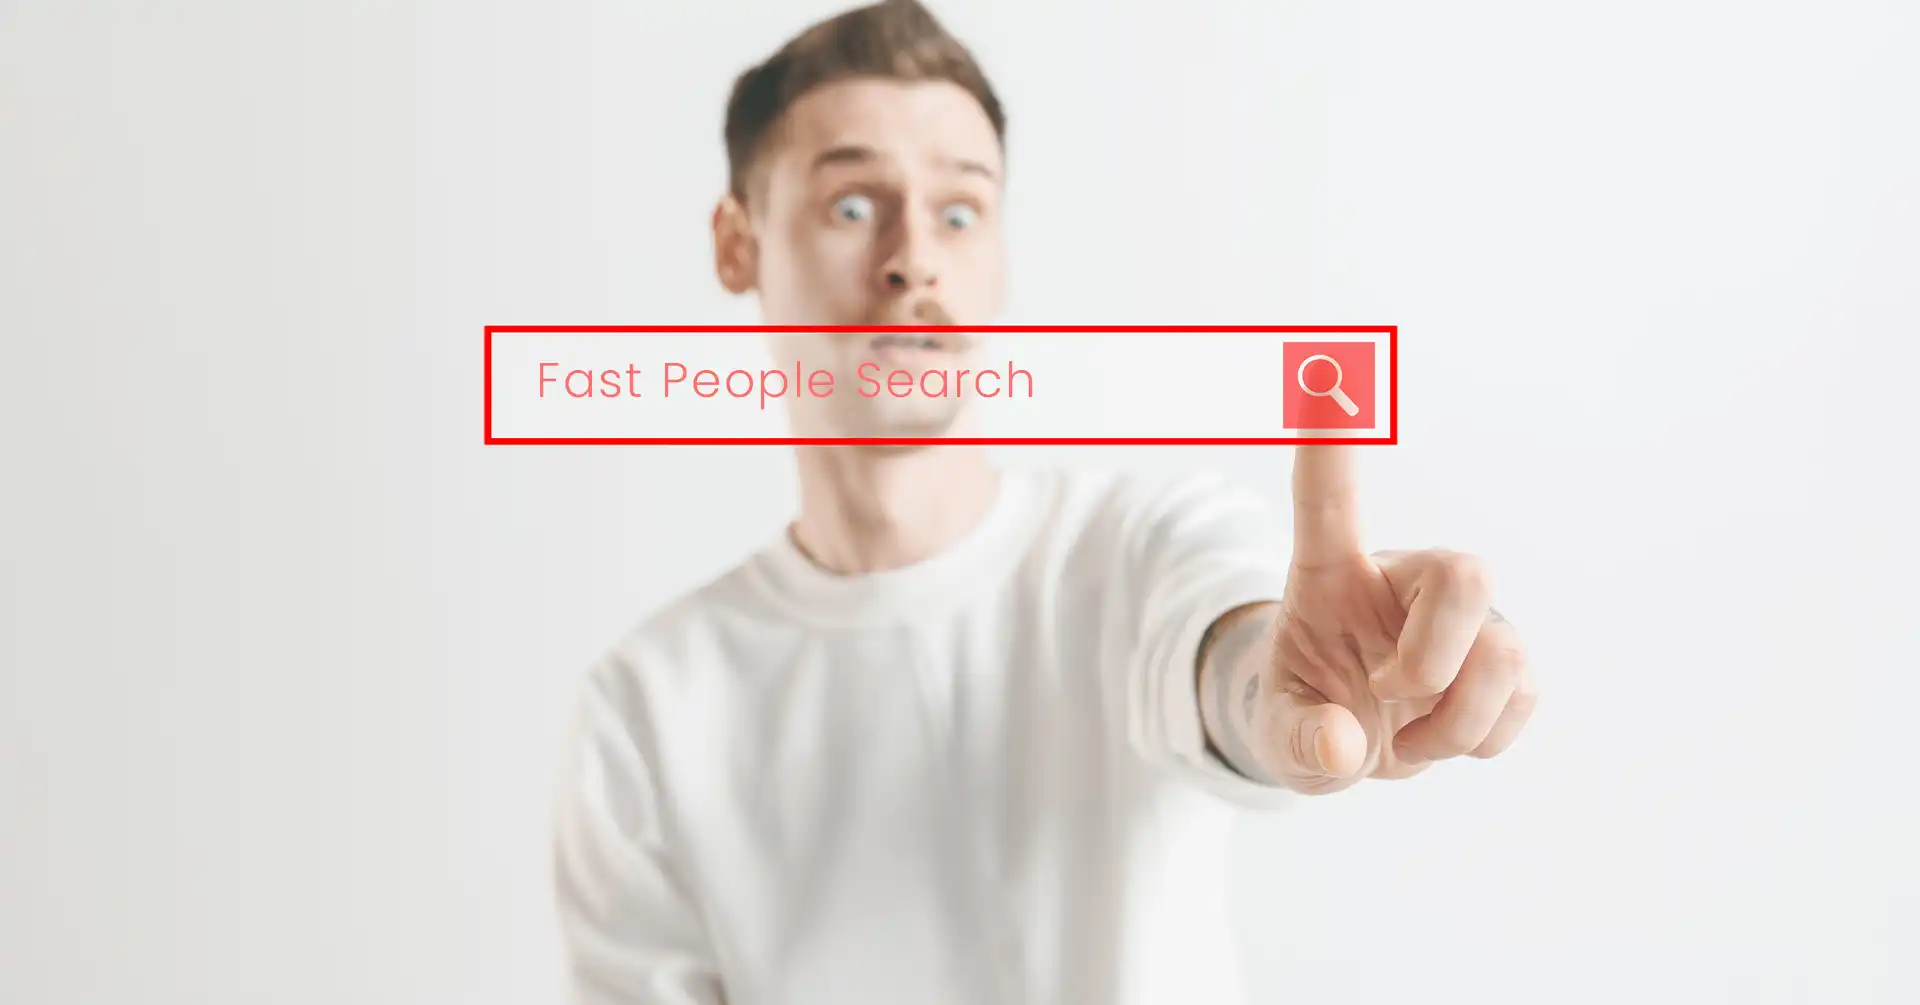 fastpeoplesearch